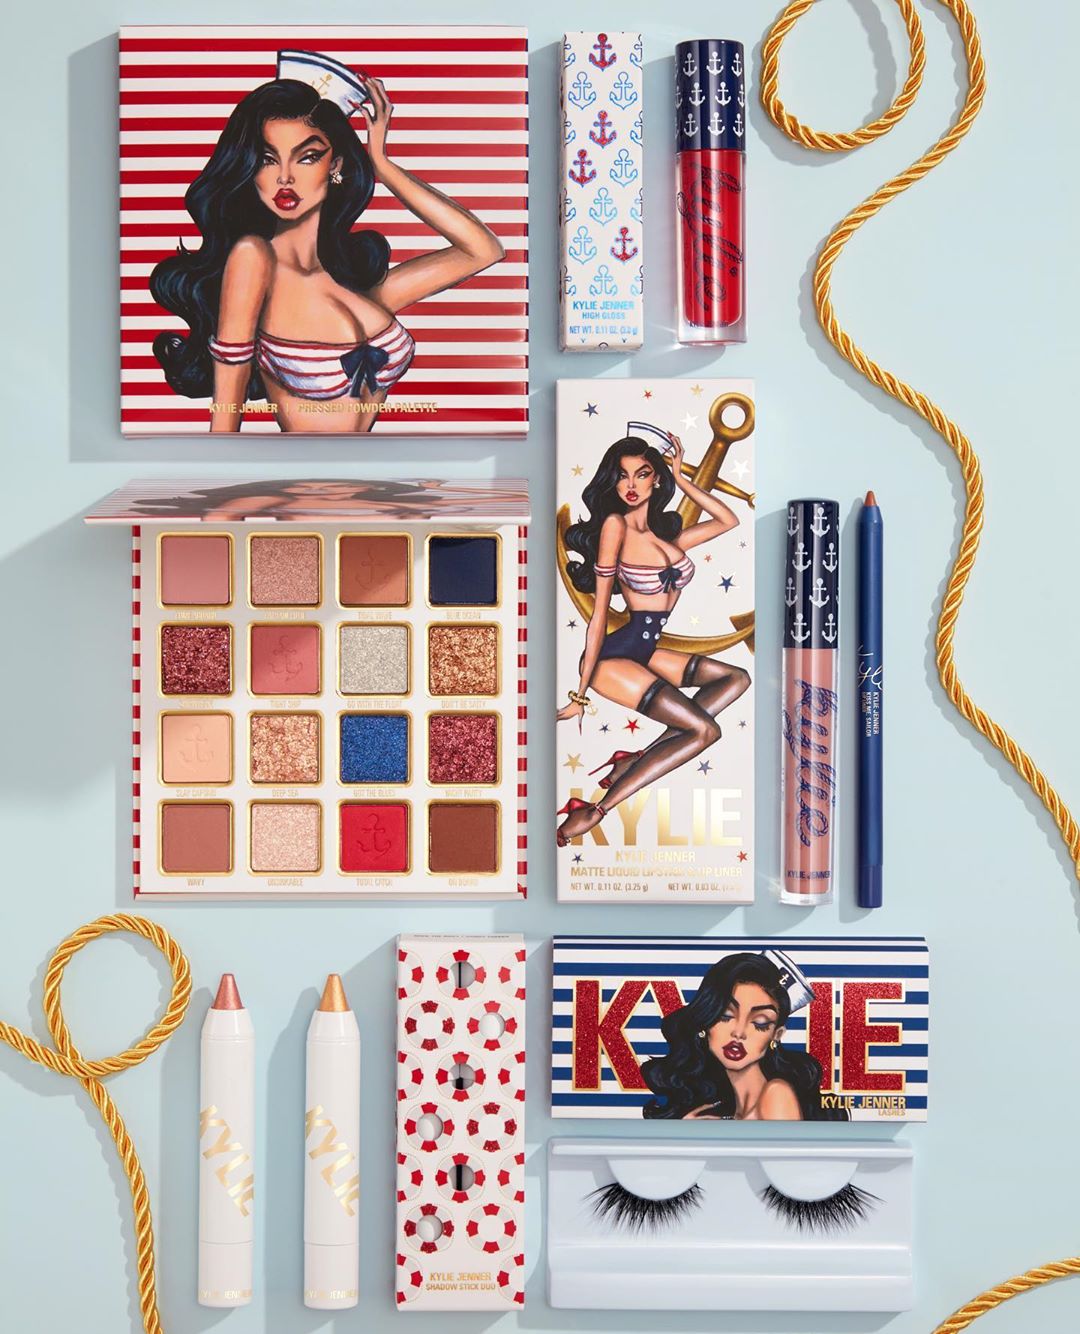 117655896 892615061225831 493198429455970575 n - Kylie Cosmetics Sailor Summer Collection - Available Now